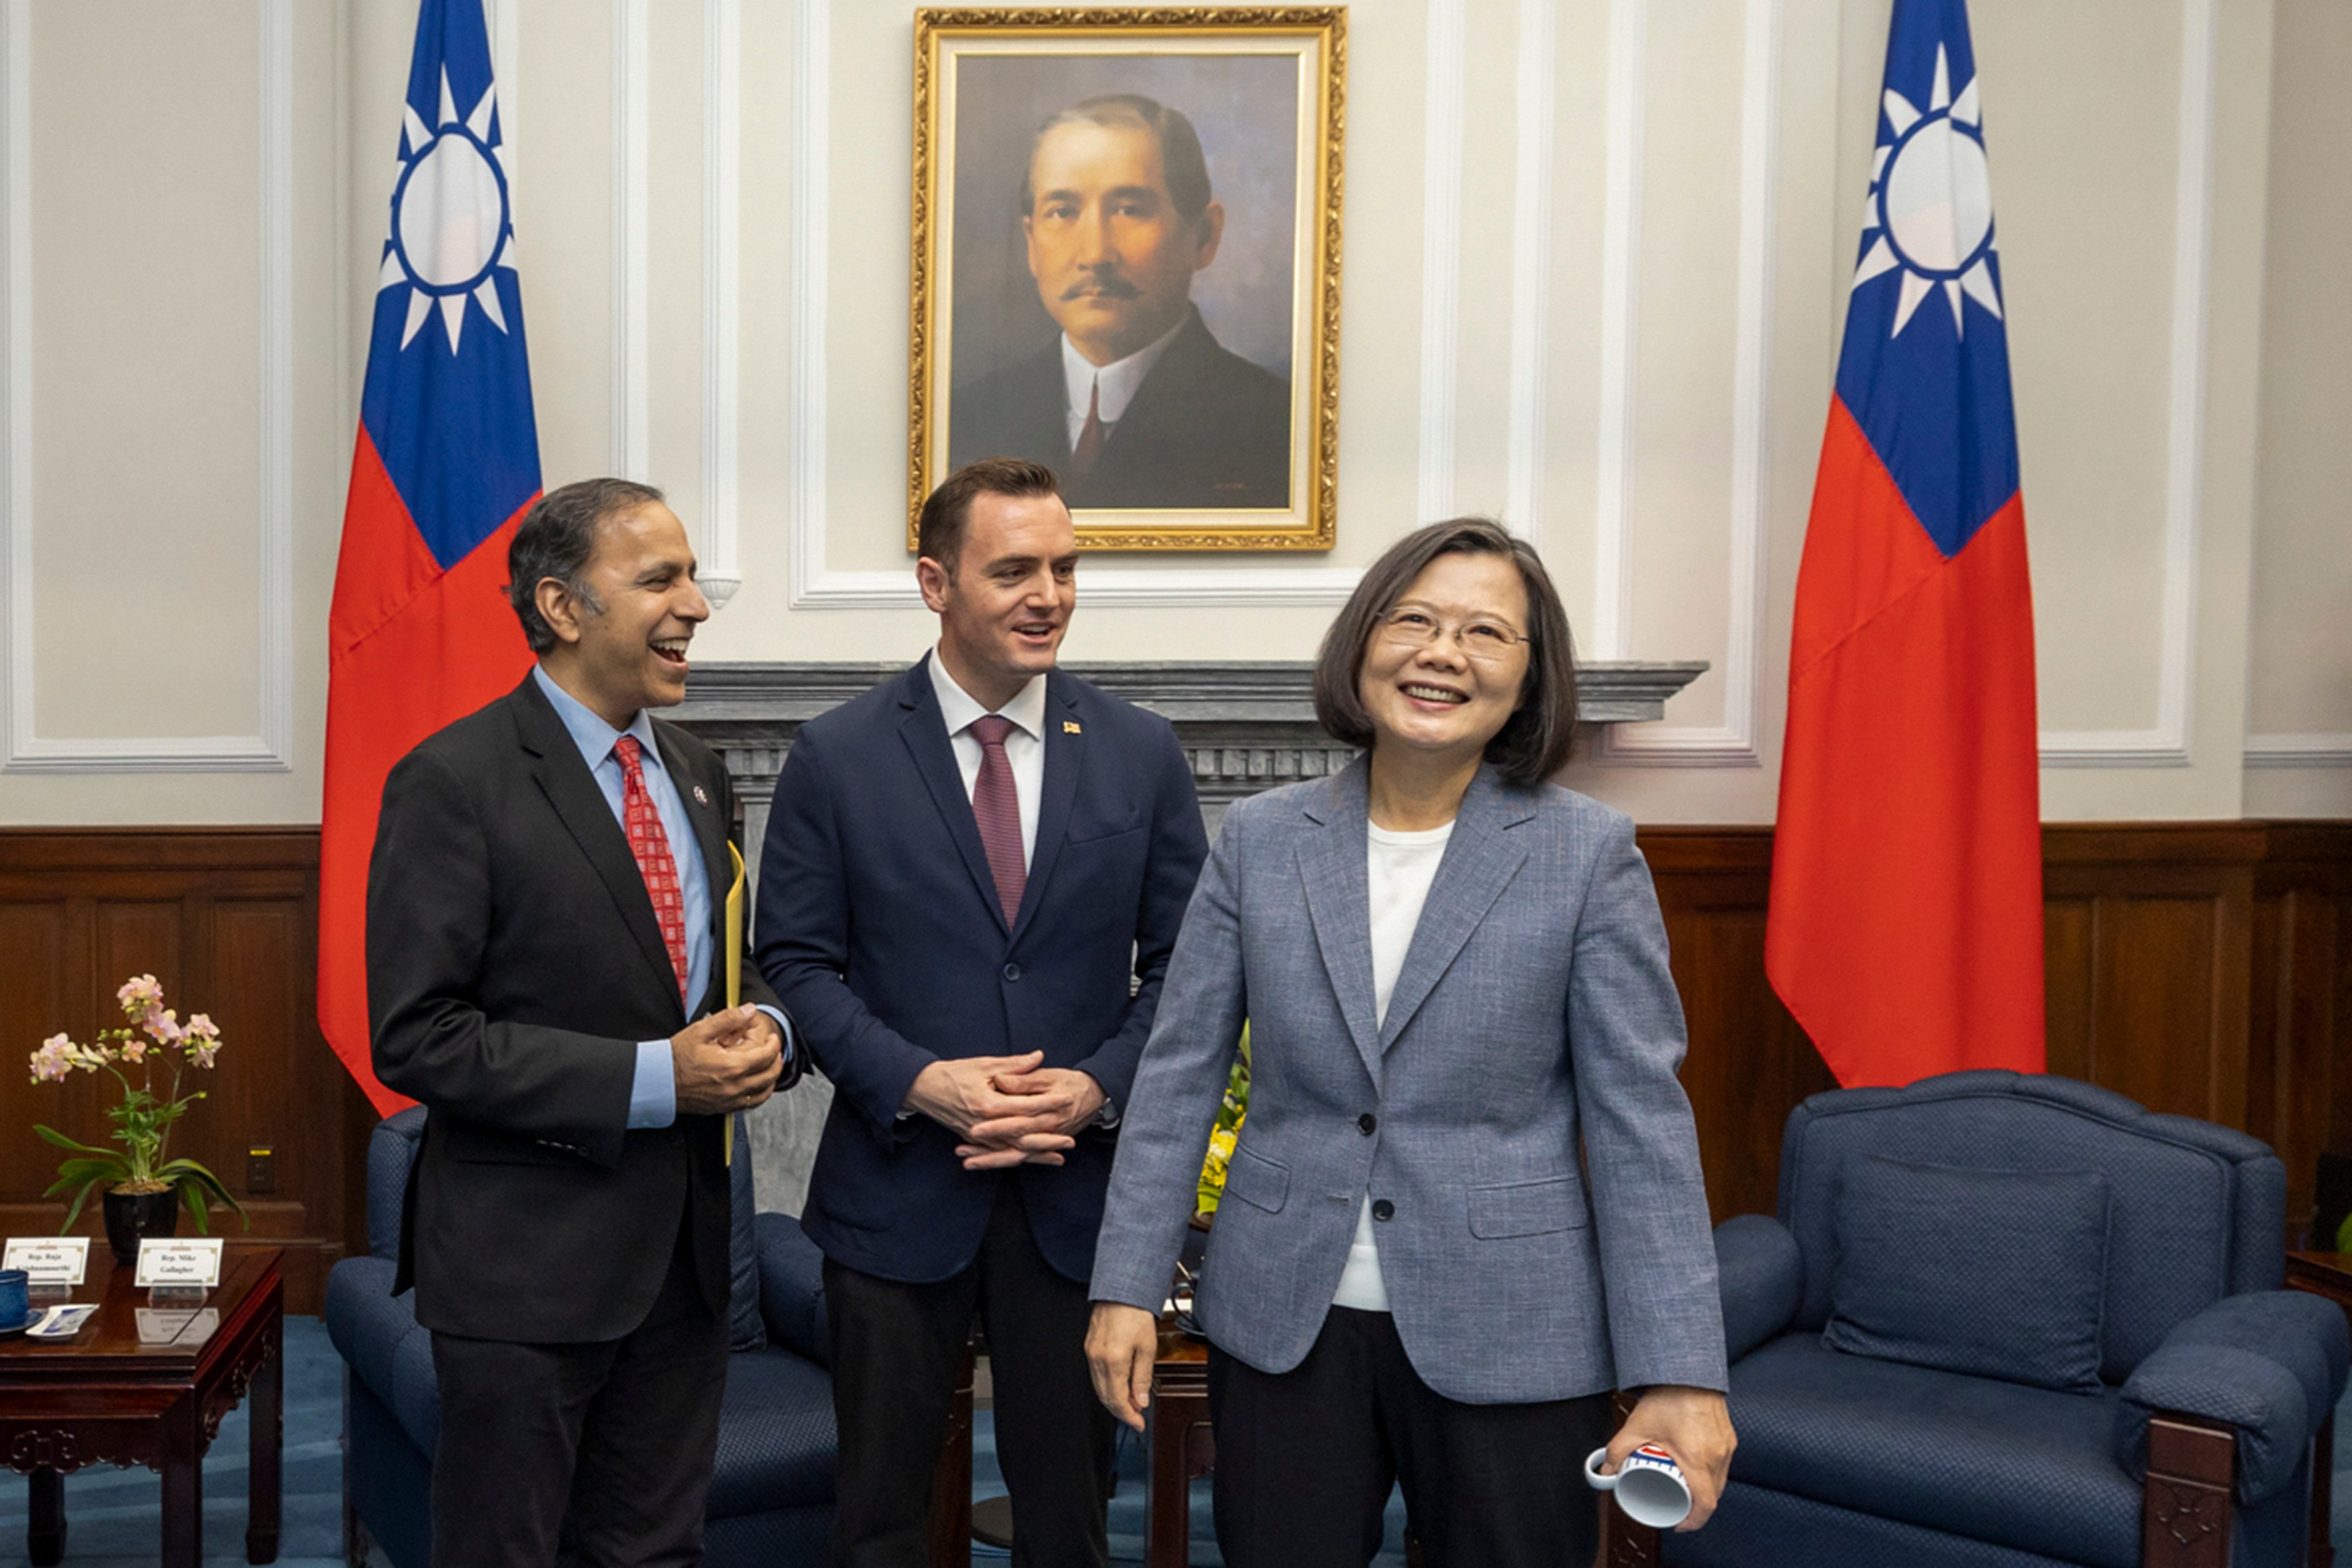 Tsai Ing-wen pictured with Mike Gallagher, the Republican chair of the House committee on the Chinese Communist Party (centre) and Democrat Raja Krishnamoorthi (left).
Photo: Taiwan Presidential Office via AP